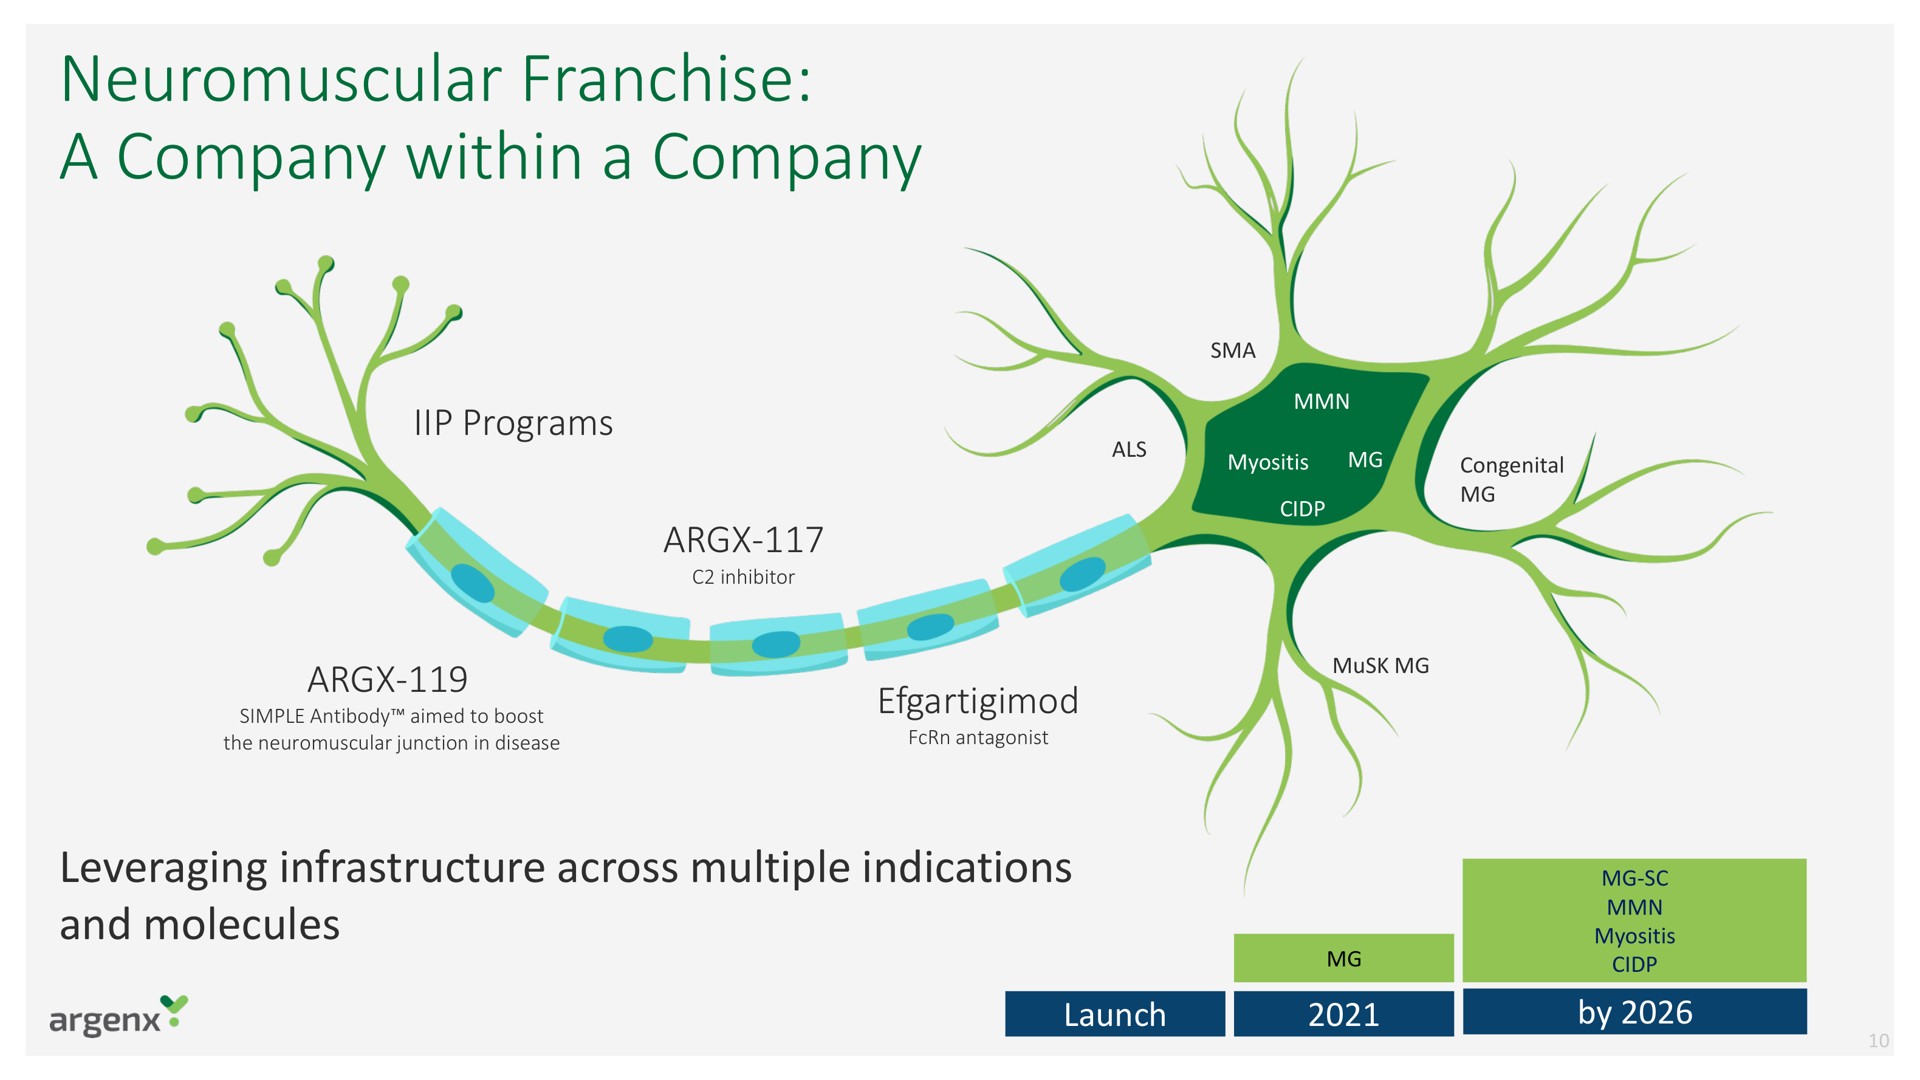 neuromuscular franchise a company within a company | argenx SE